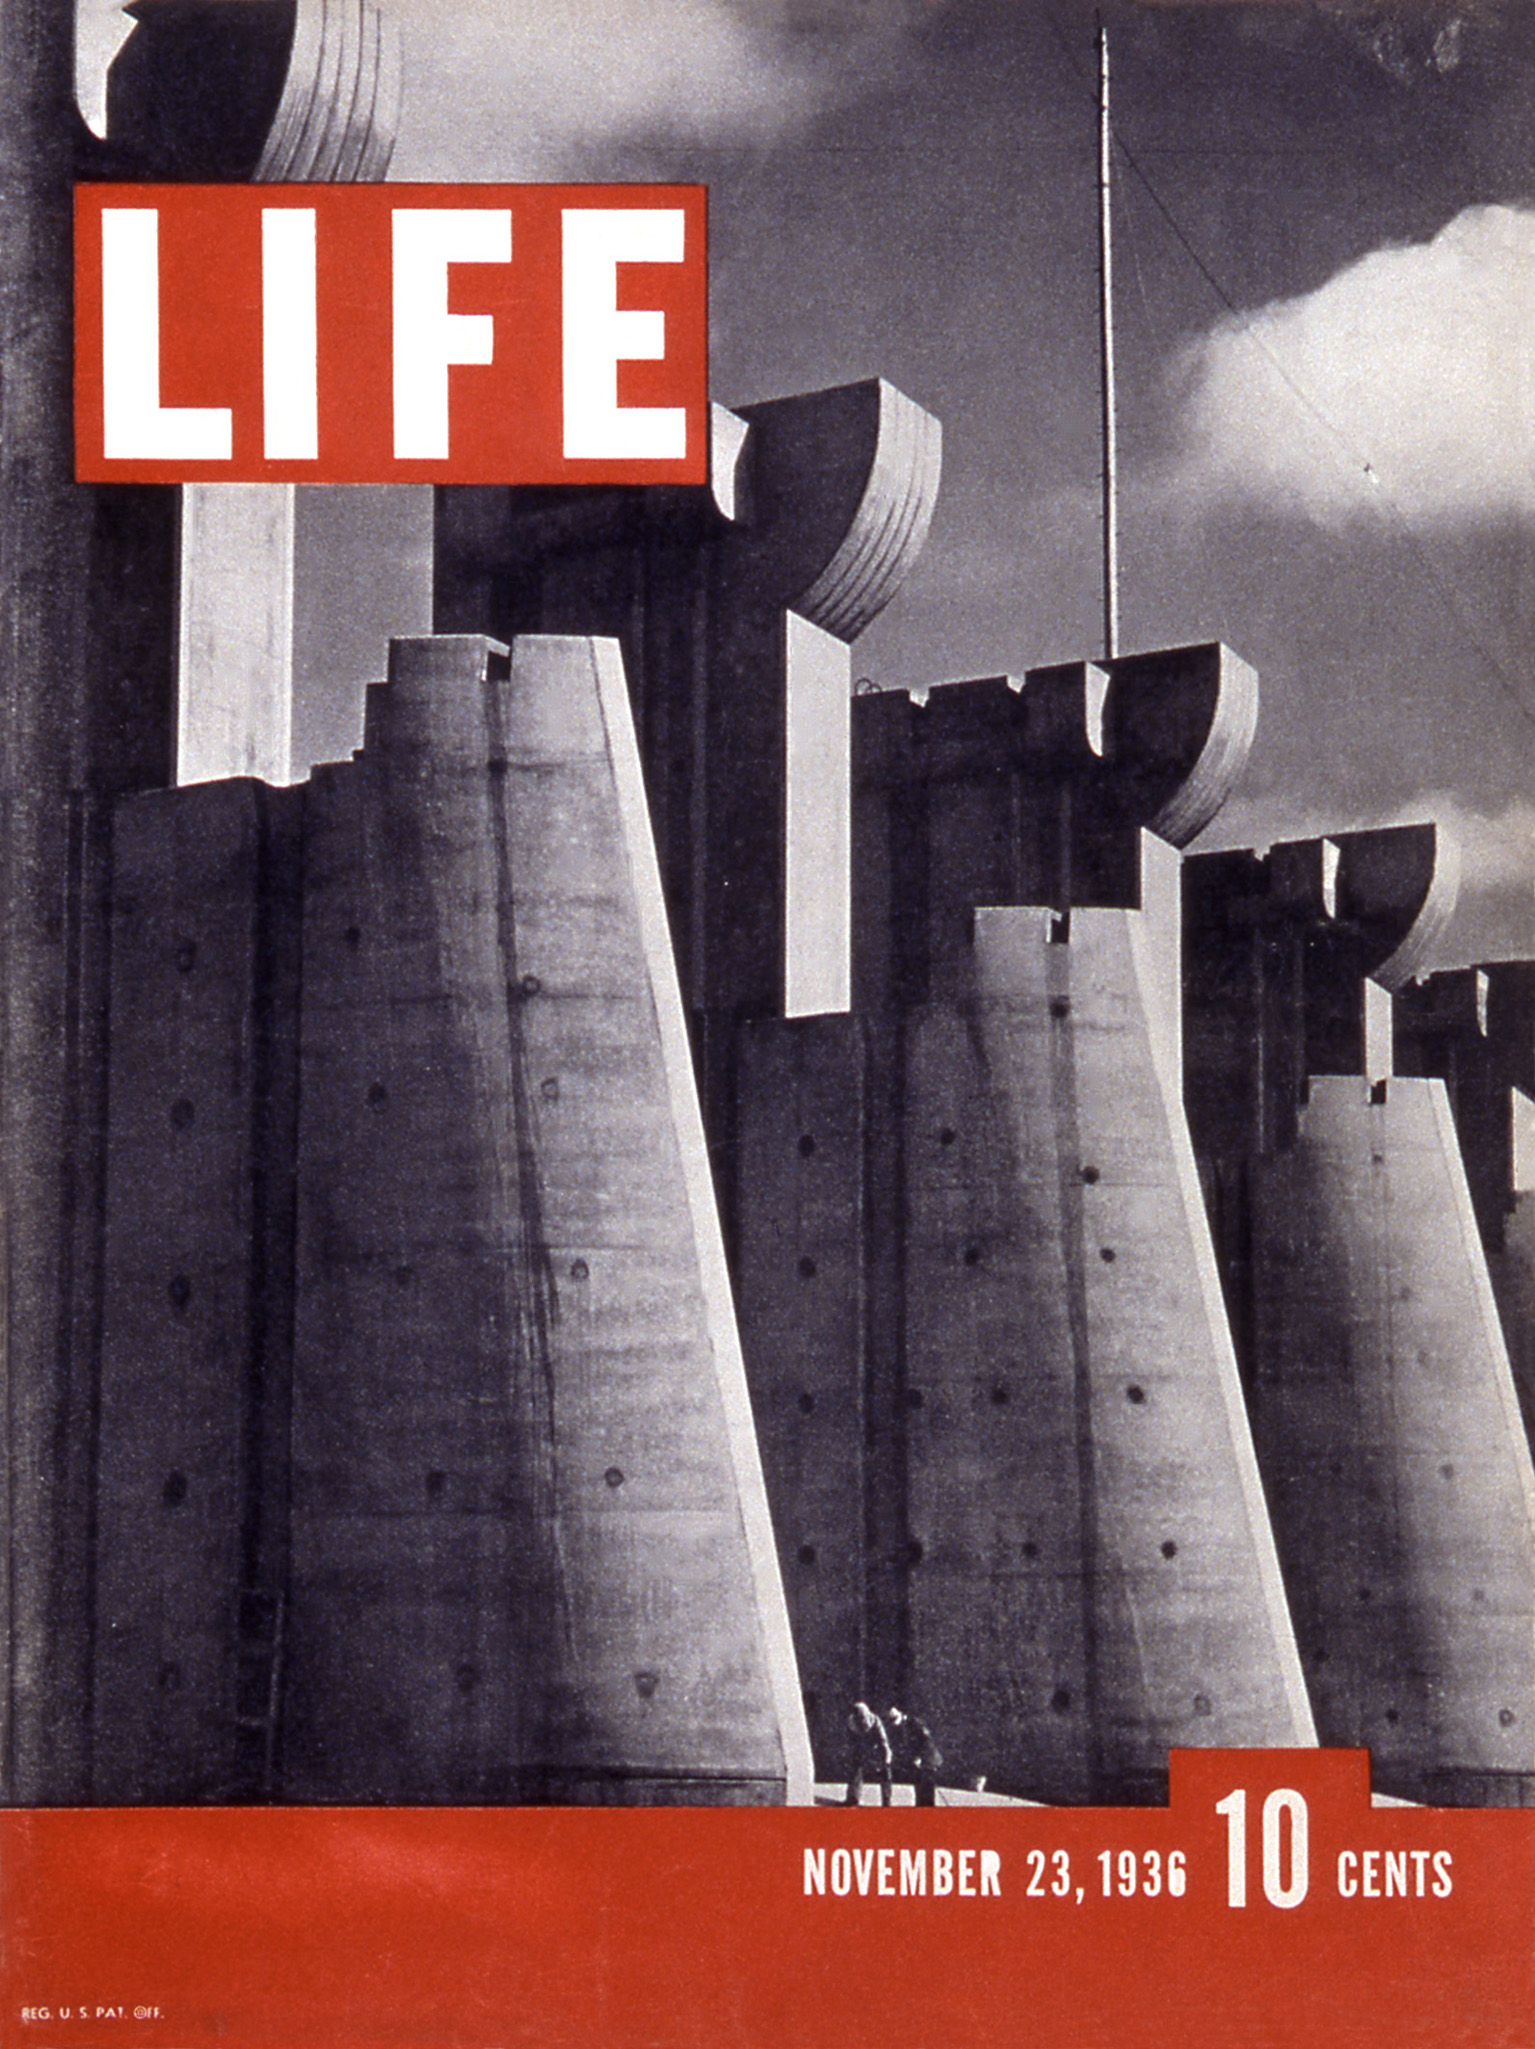 LIFE first issue (Cover page), Issue: November 23, 1936